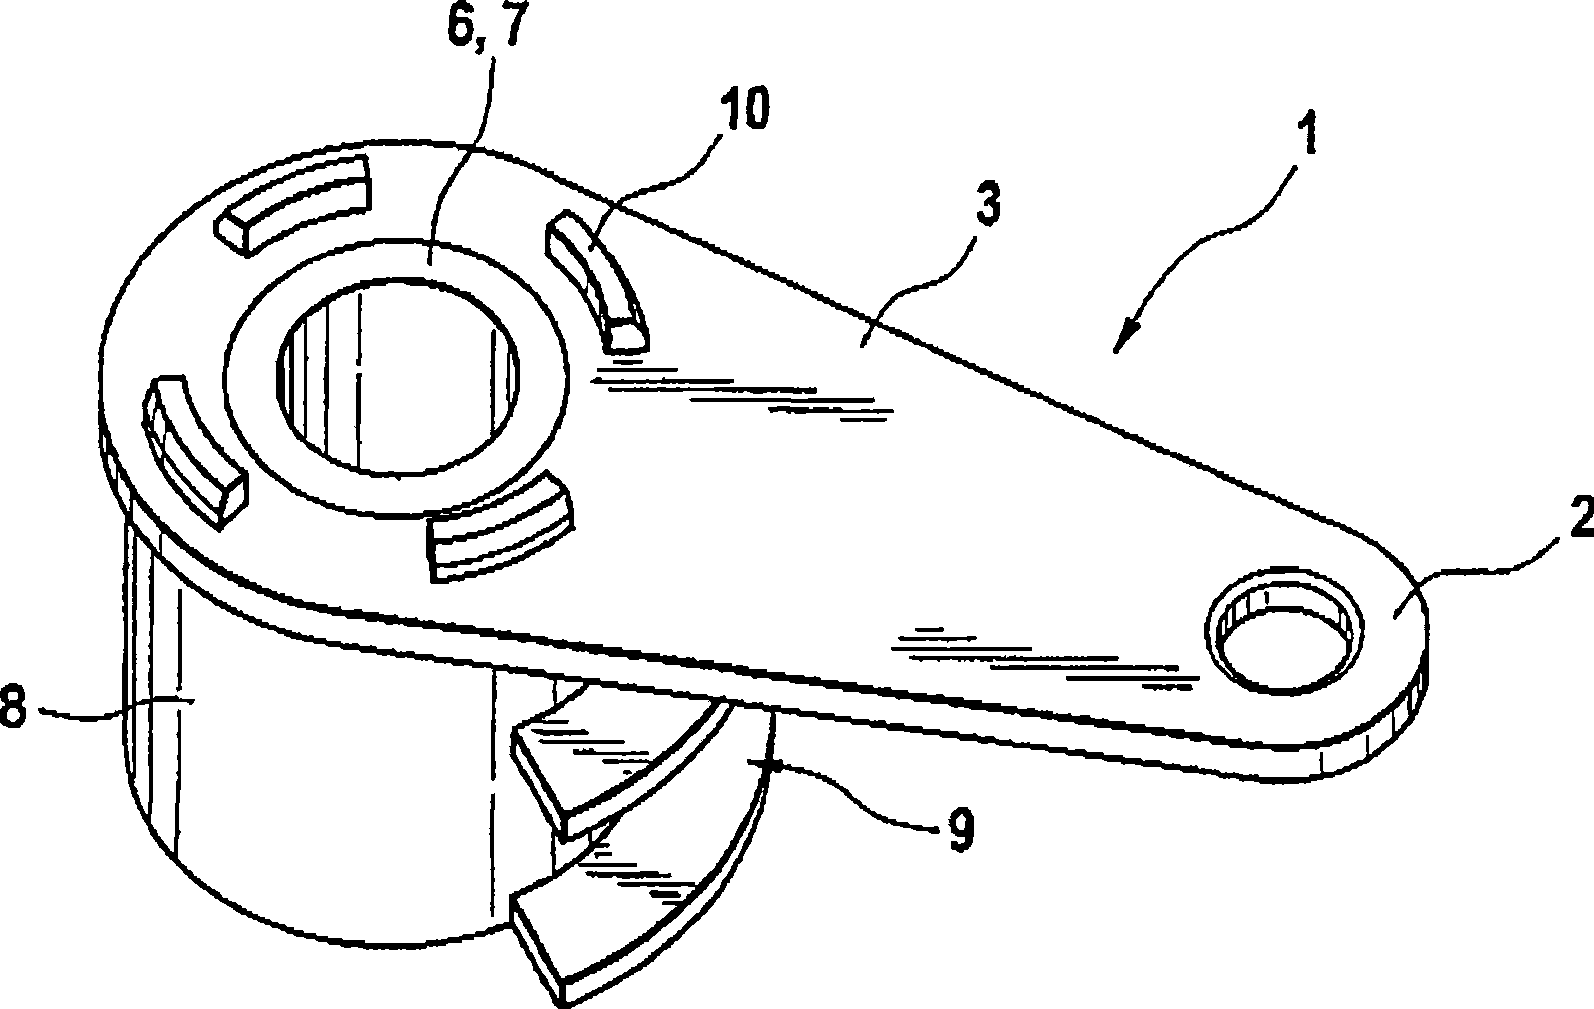 Ger lever for operation device of automobile gear-box